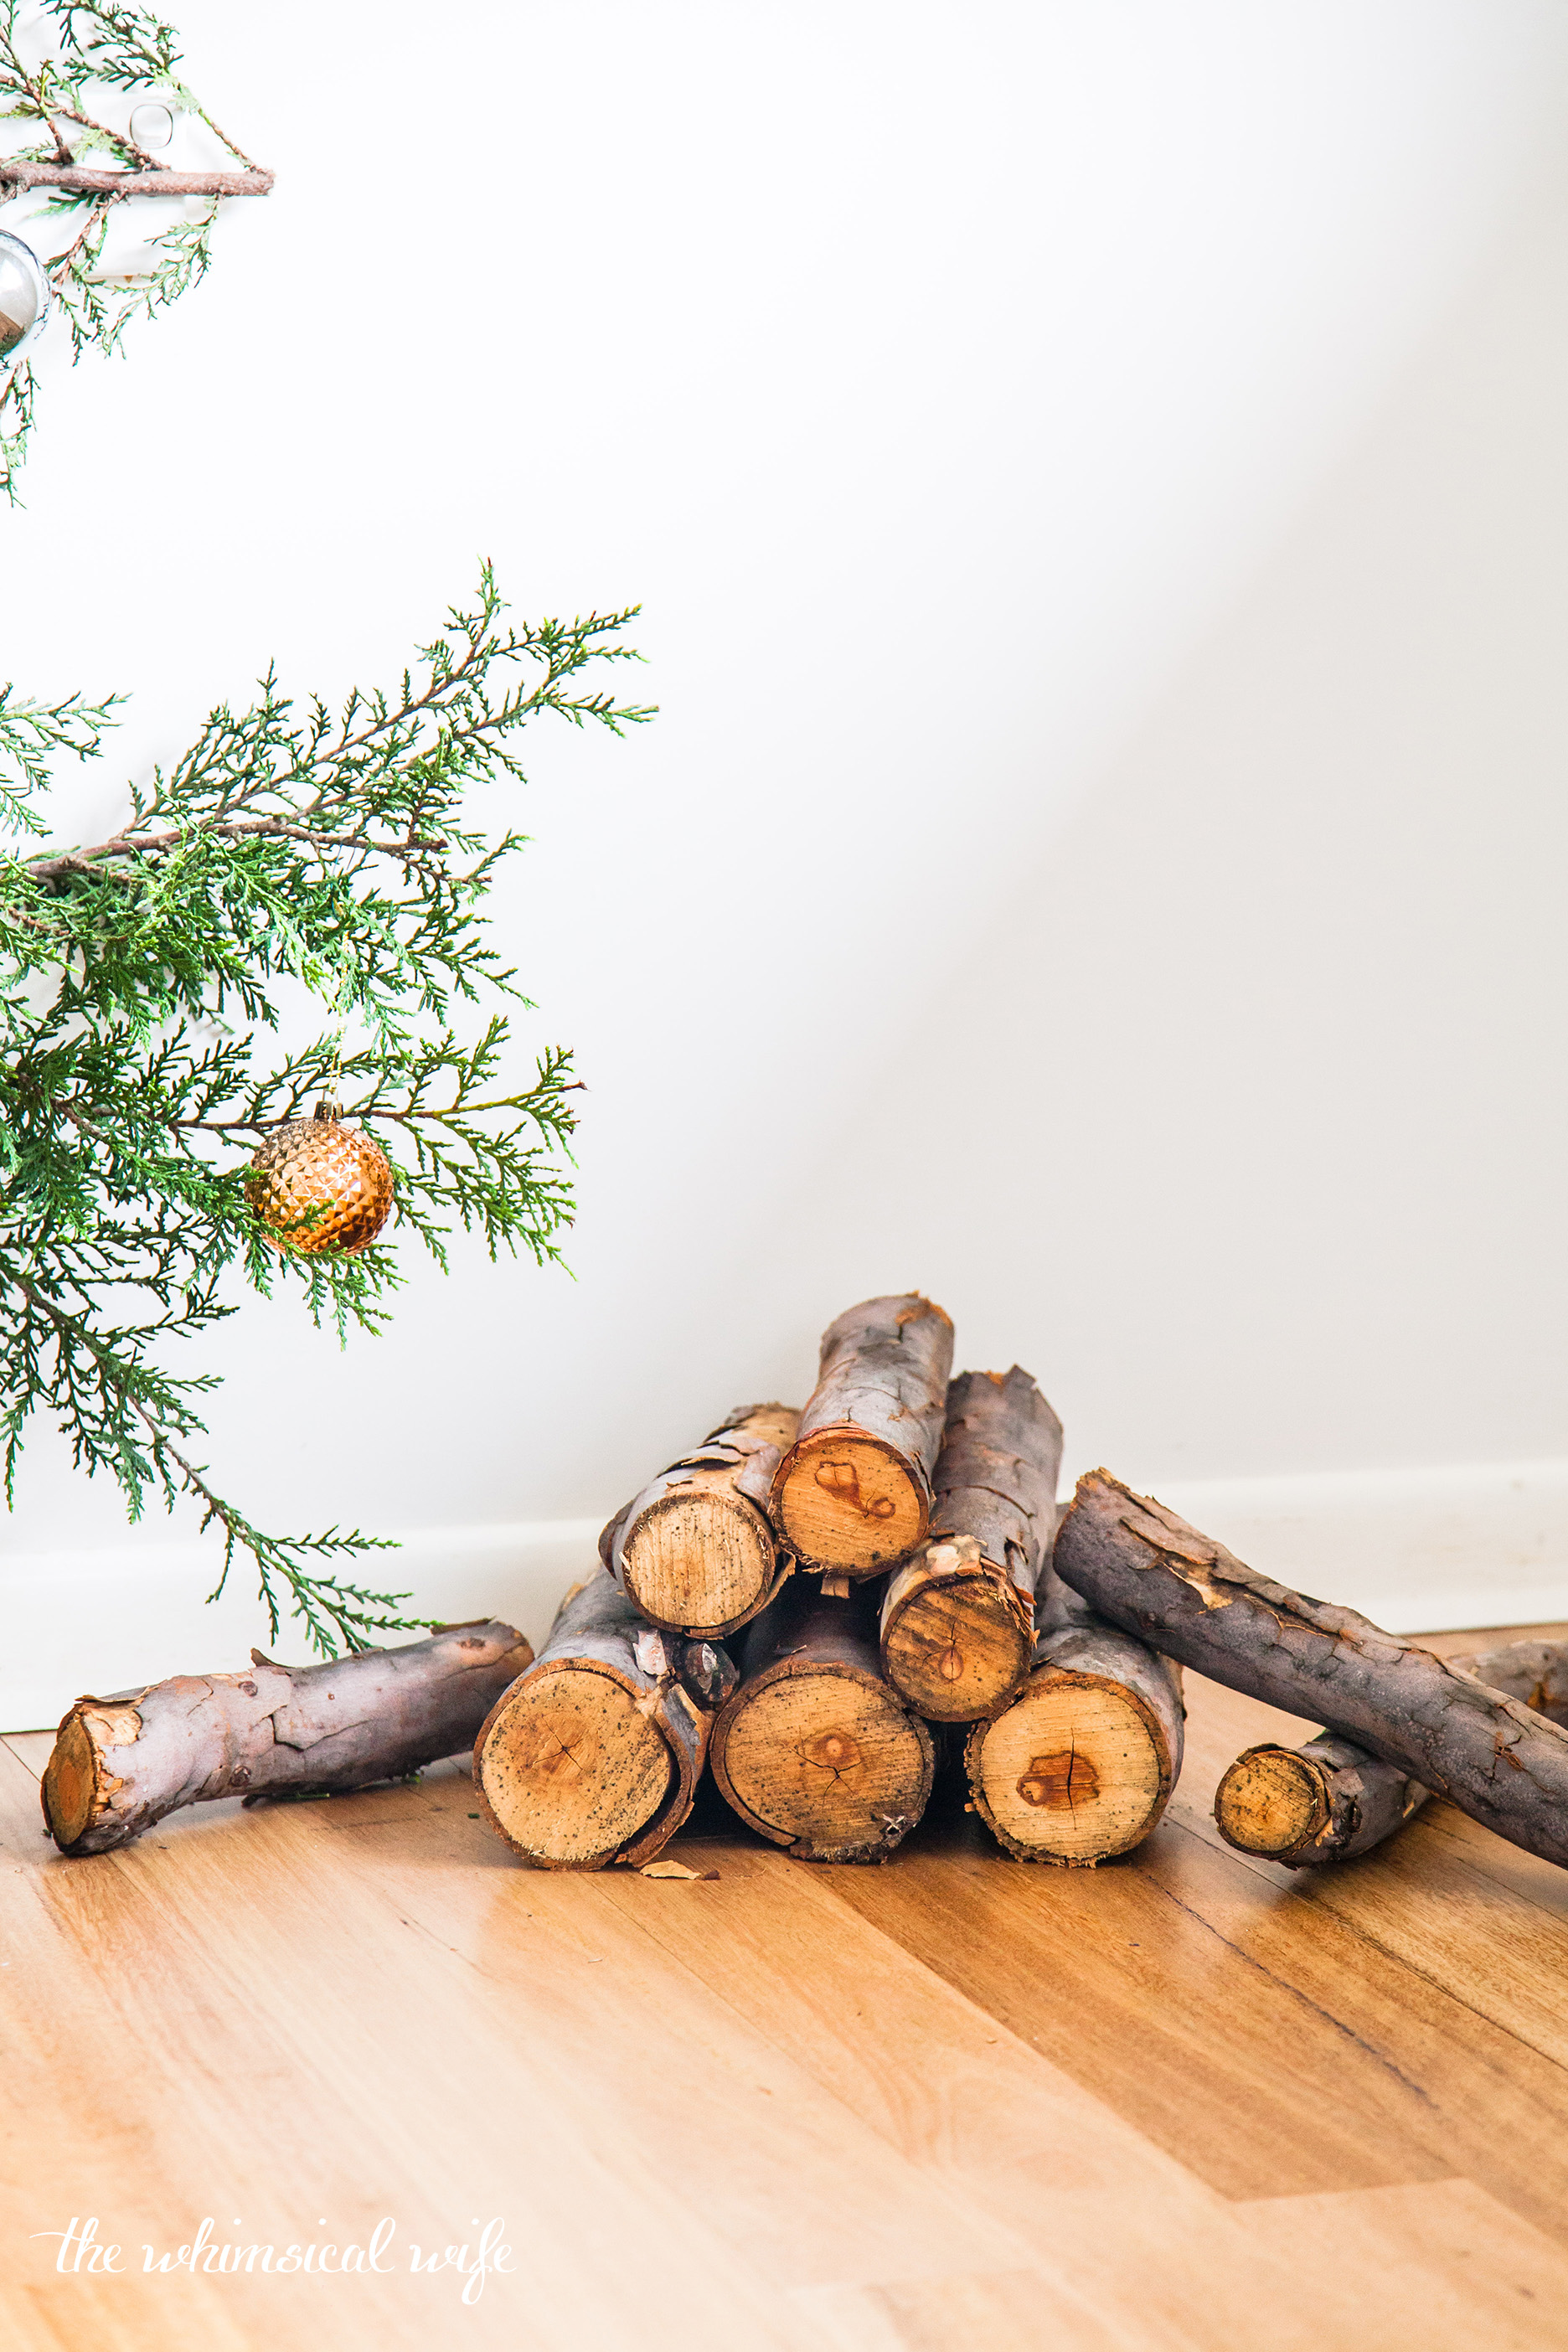 Quick & Easy DIY Pine Branch Christmas Tree — The Whimsical Wife, Cook, Create